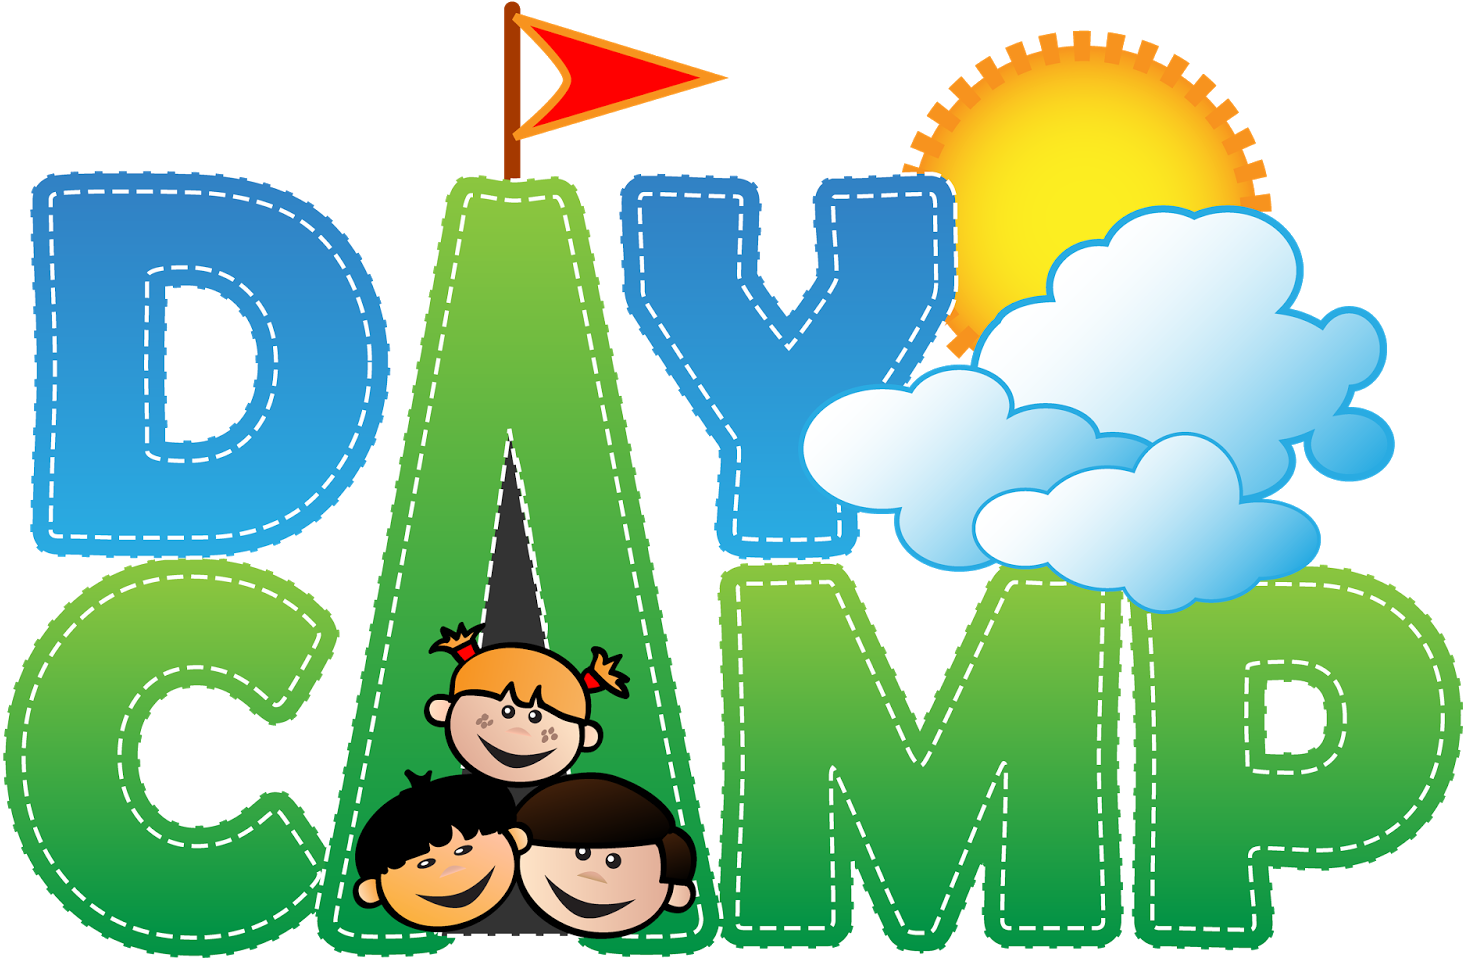 Download and share clipart about Day Camp Summer Camp Child Clip Art - Da.....